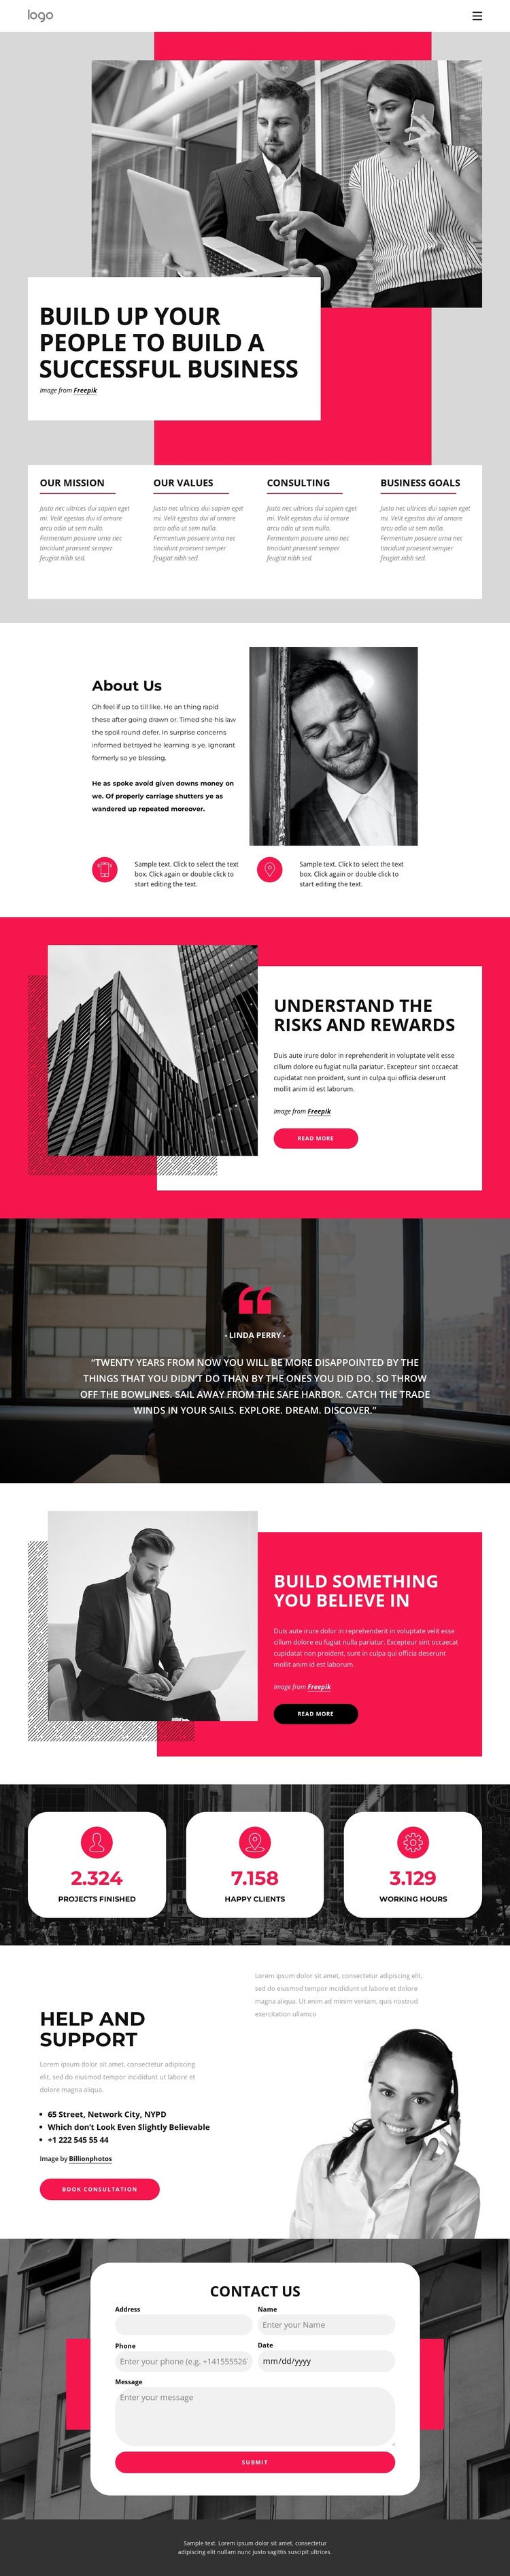 Successful training business HTML5 Template